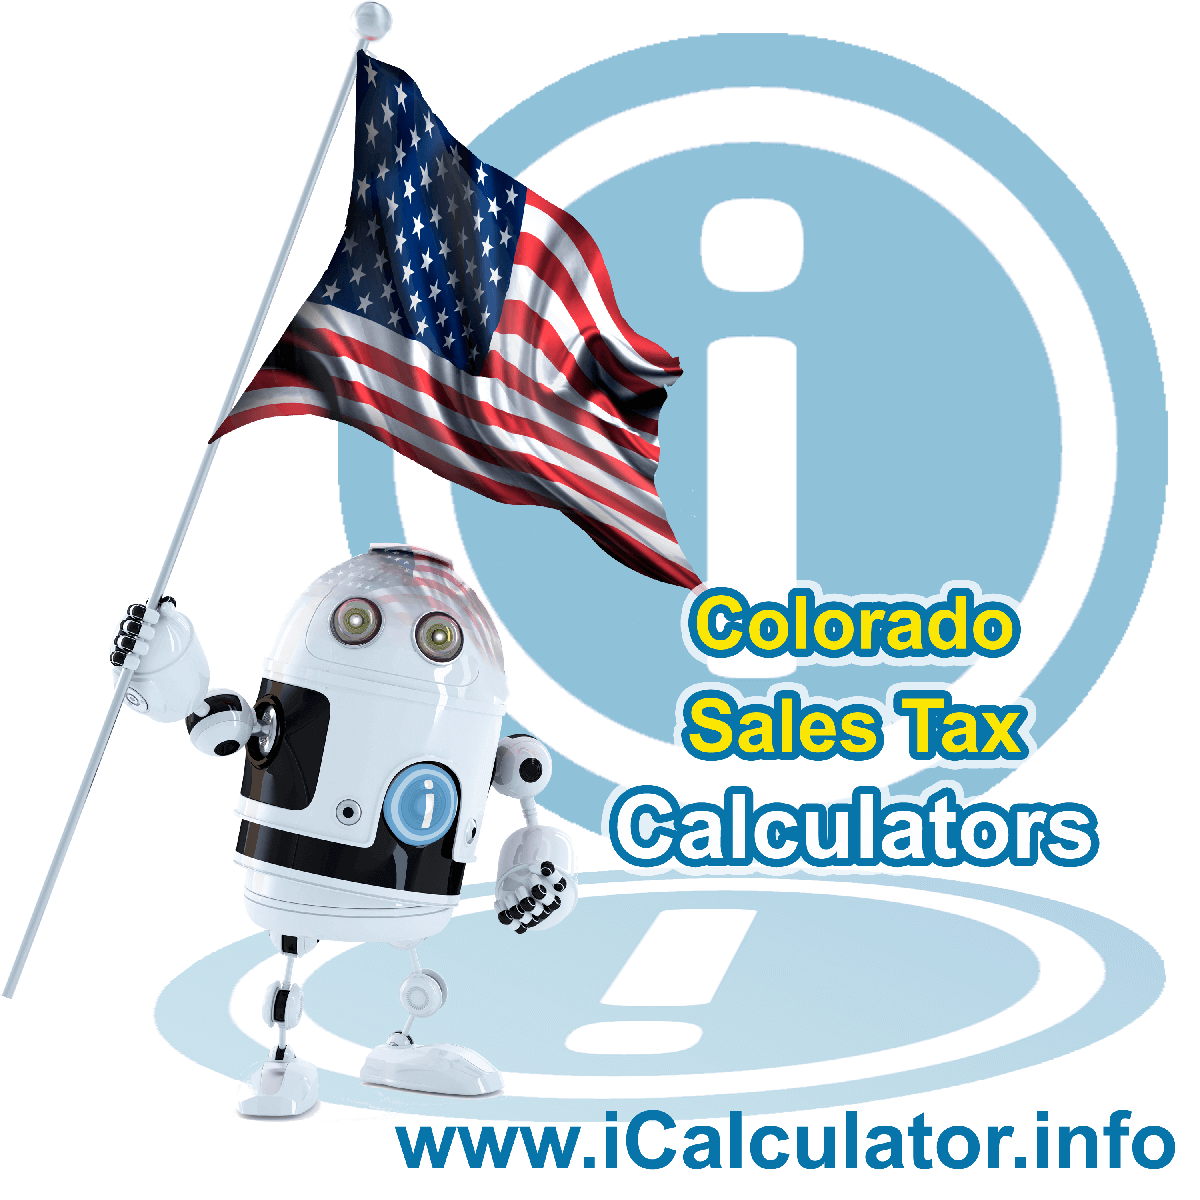 Cortez Sales Rates: This image illustrates a calculator robot calculating Cortez sales tax manually using the Cortez Sales Tax Formula. You can use this information to calculate Cortez Sales Tax manually or use the Cortez Sales Tax Calculator to calculate sales tax online.